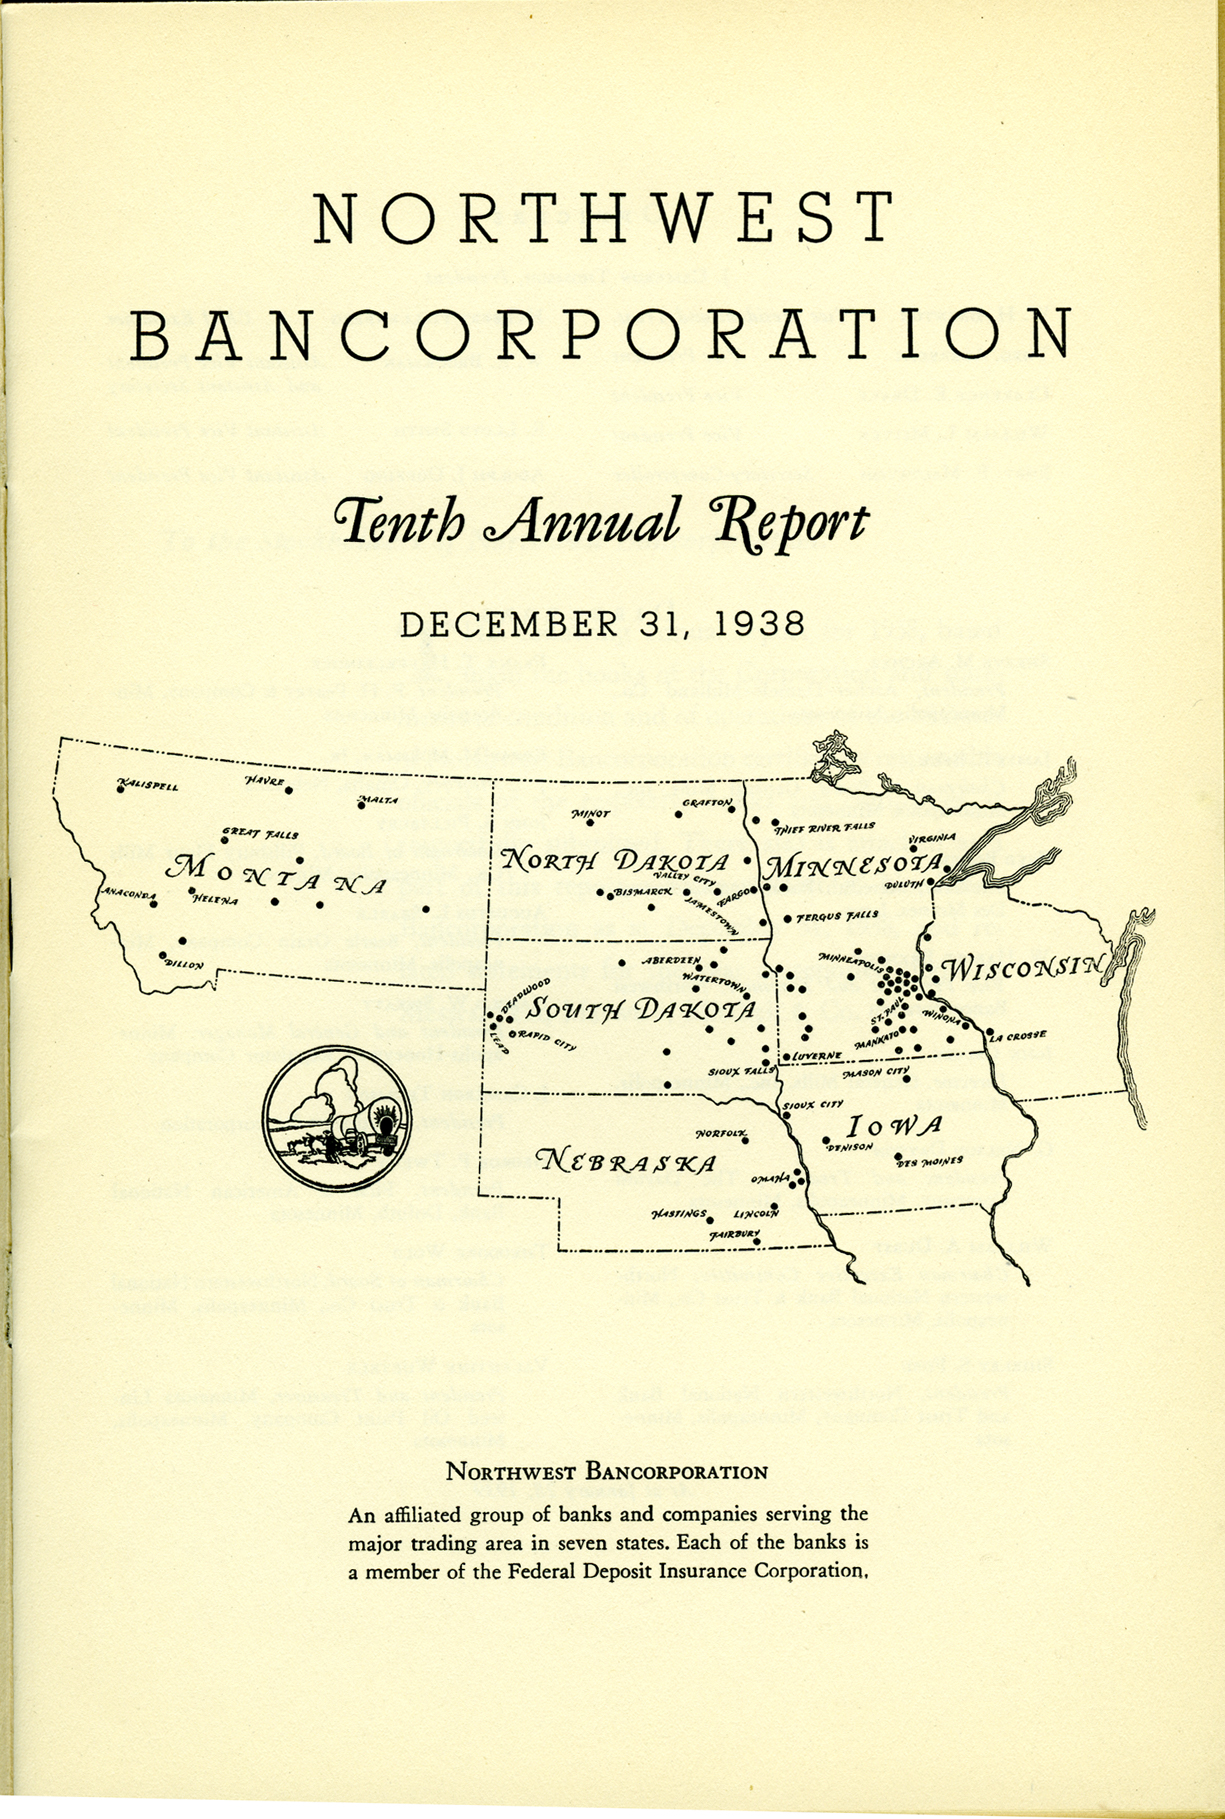 The yellow cover of the Northwest Bancorporation Annual Report from 1938 featuring an illustration of seven U.S. states of Wisconsin, Minnesota, Iowa, Nebraska, South Dakota, North Dakota, and Montana. Image link will enlarge image.